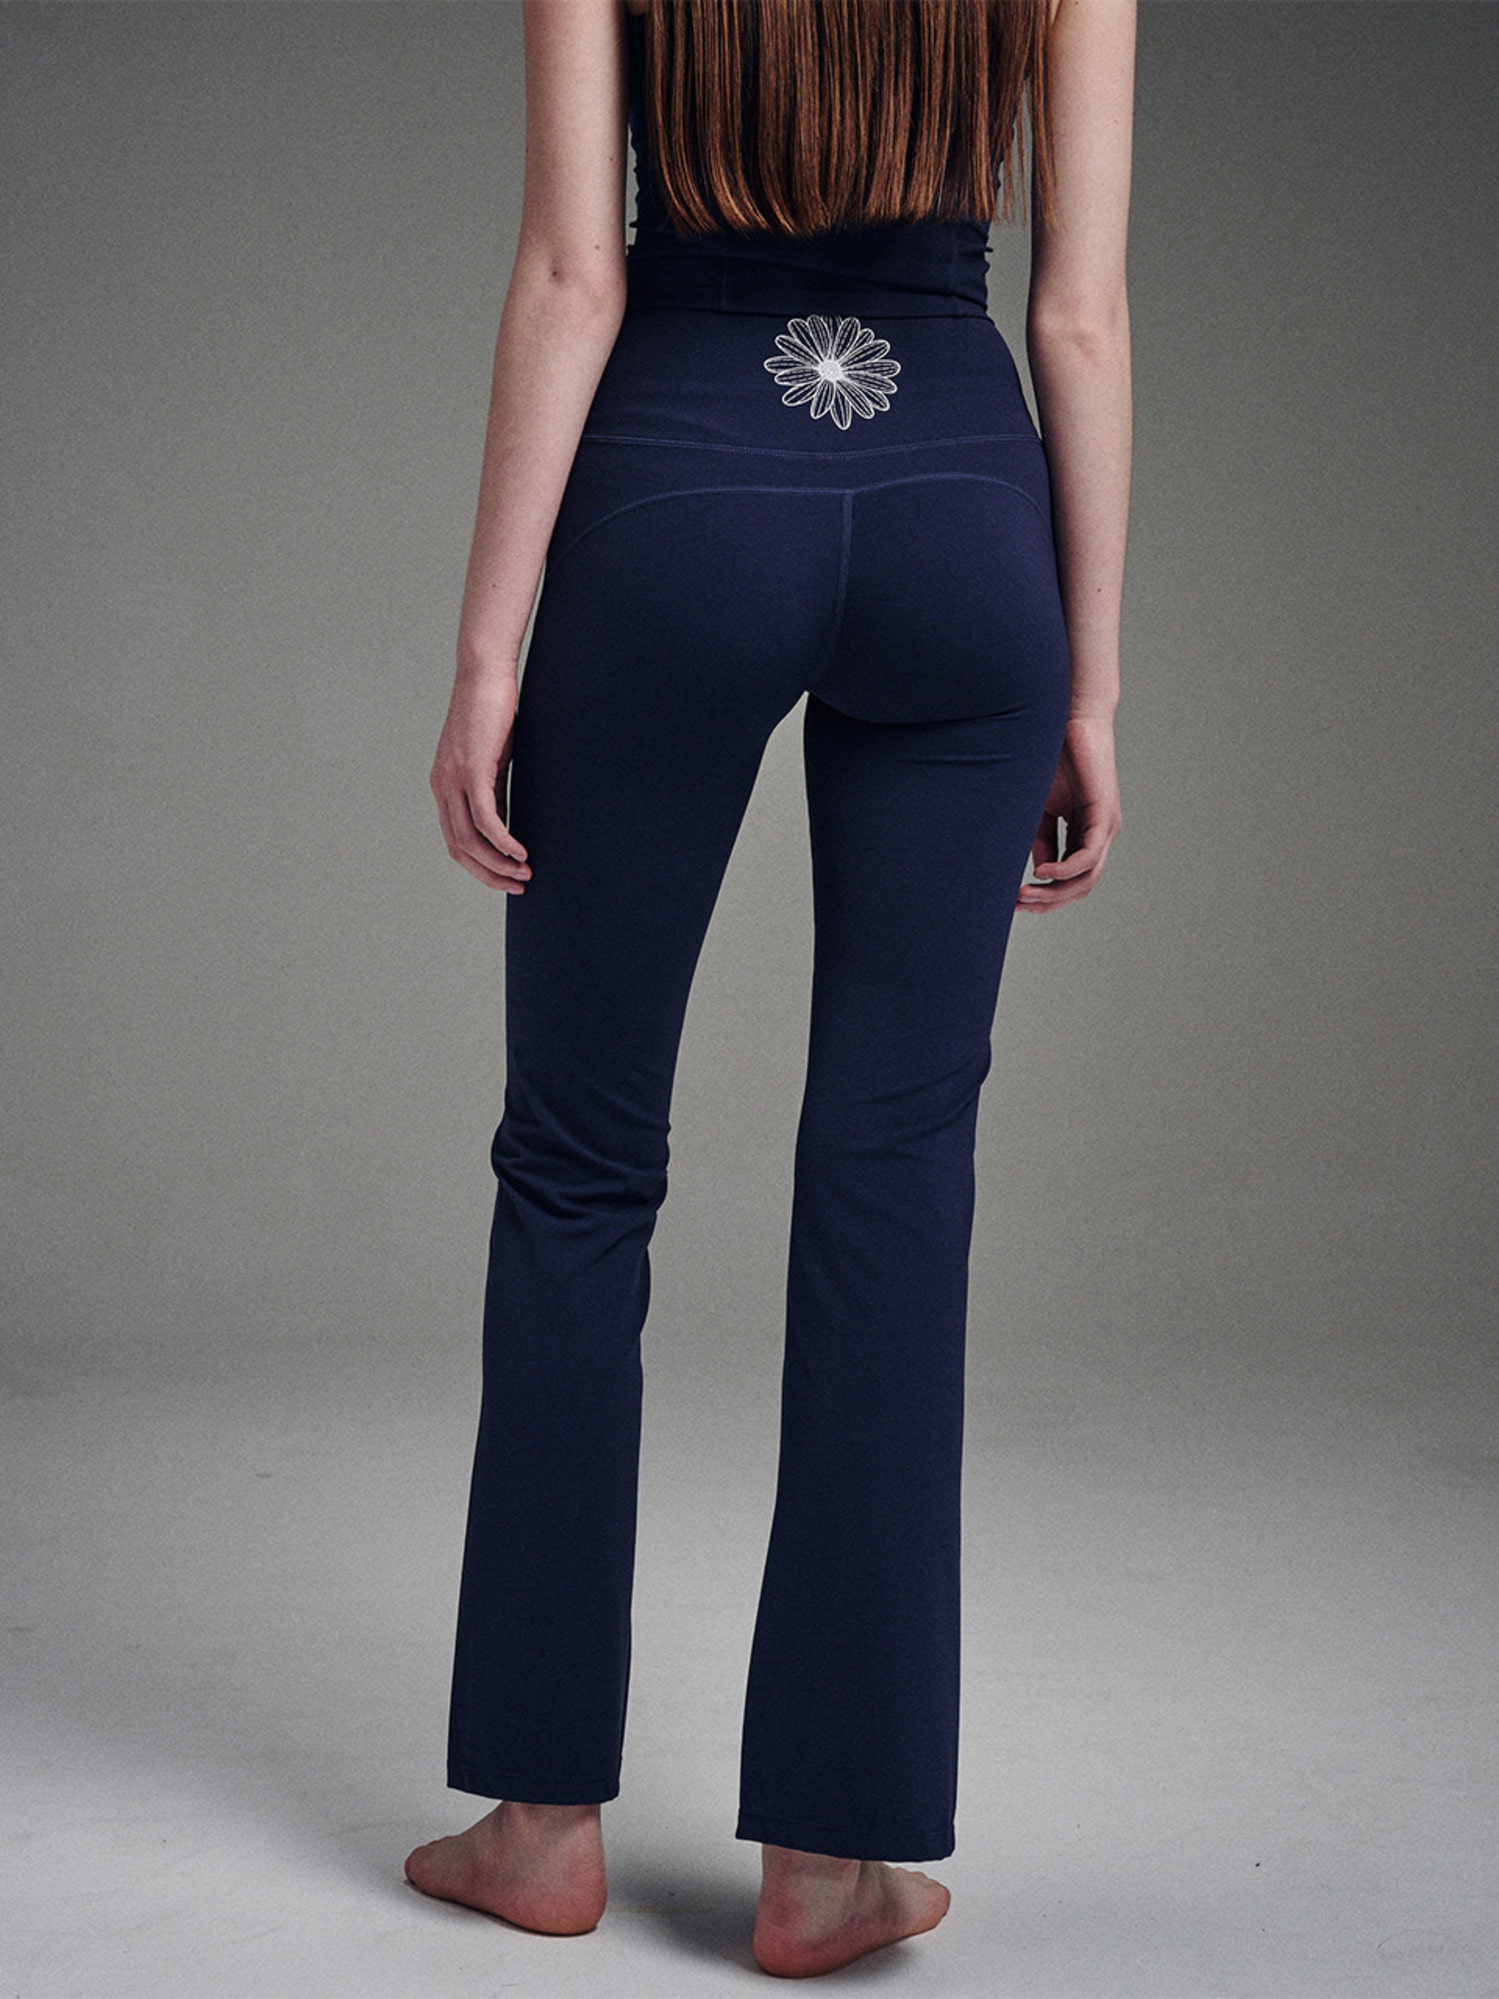 BEURRE ULTIMATE COMFORT bootcut leggings theflower_NAVY IVORY